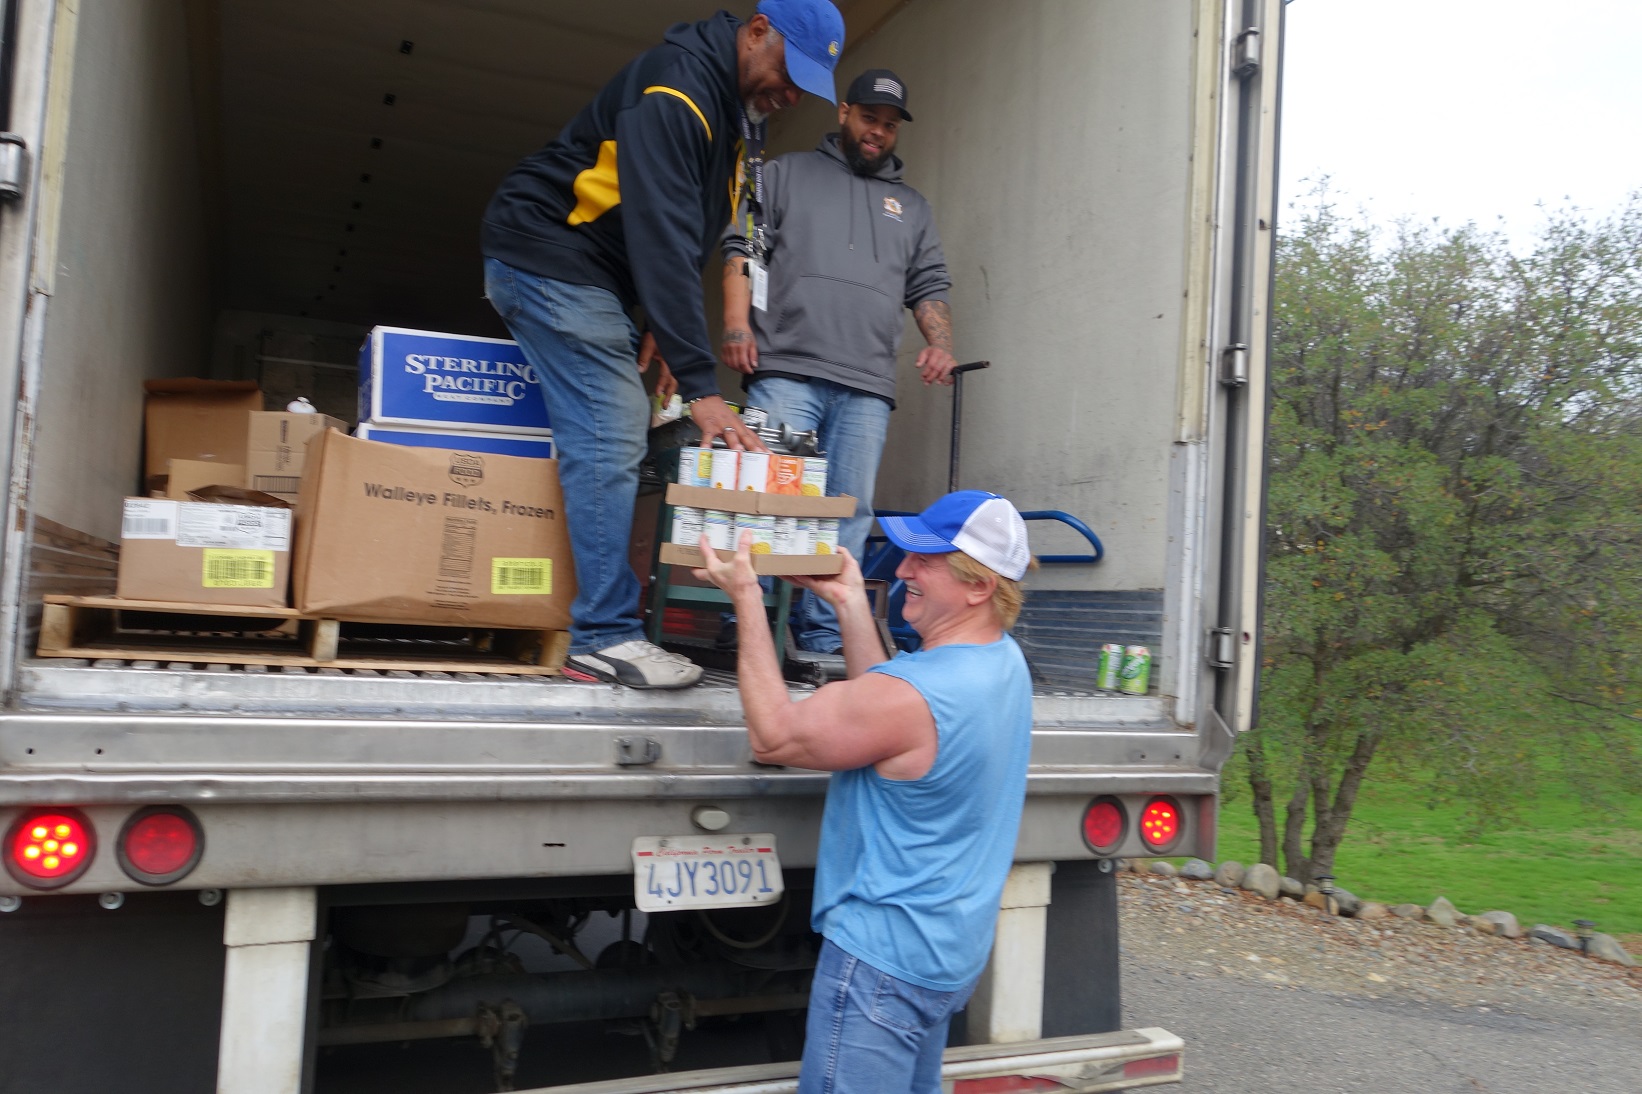 California Valley Miwok Tribe's staff delivering good supplies.